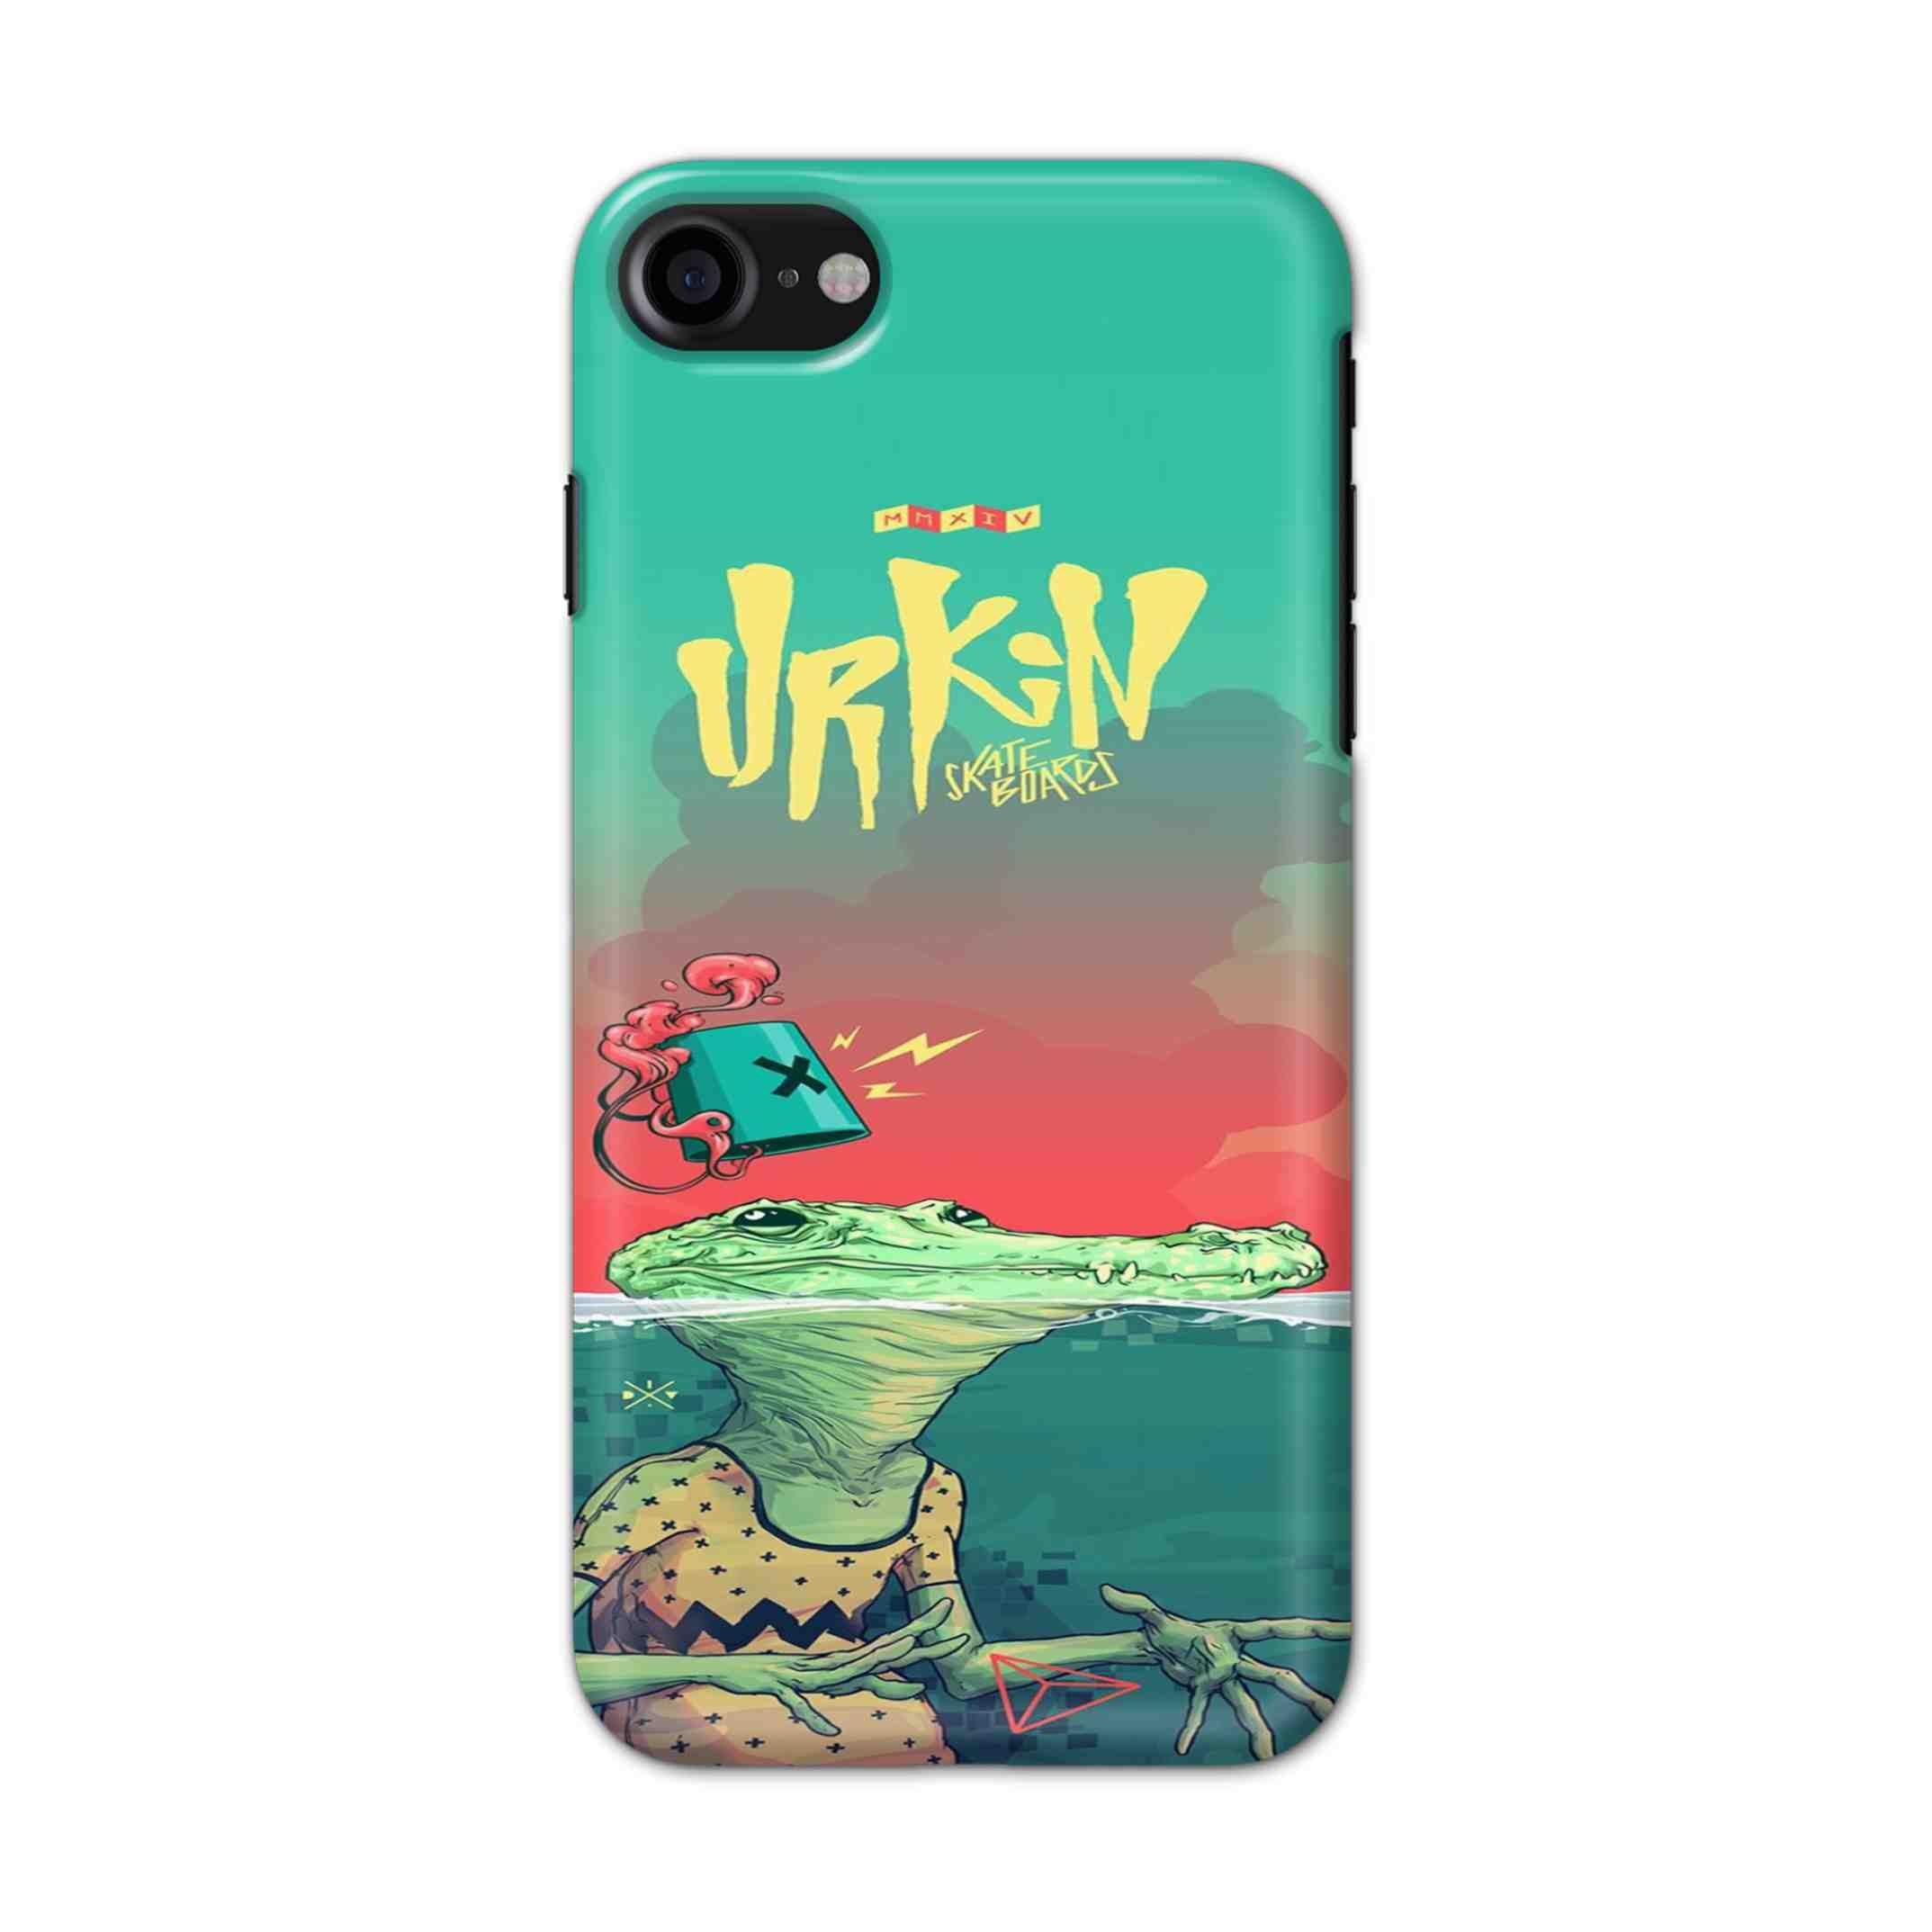 Buy Urkin Hard Back Mobile Phone Case/Cover For iPhone 7 / 8 Online